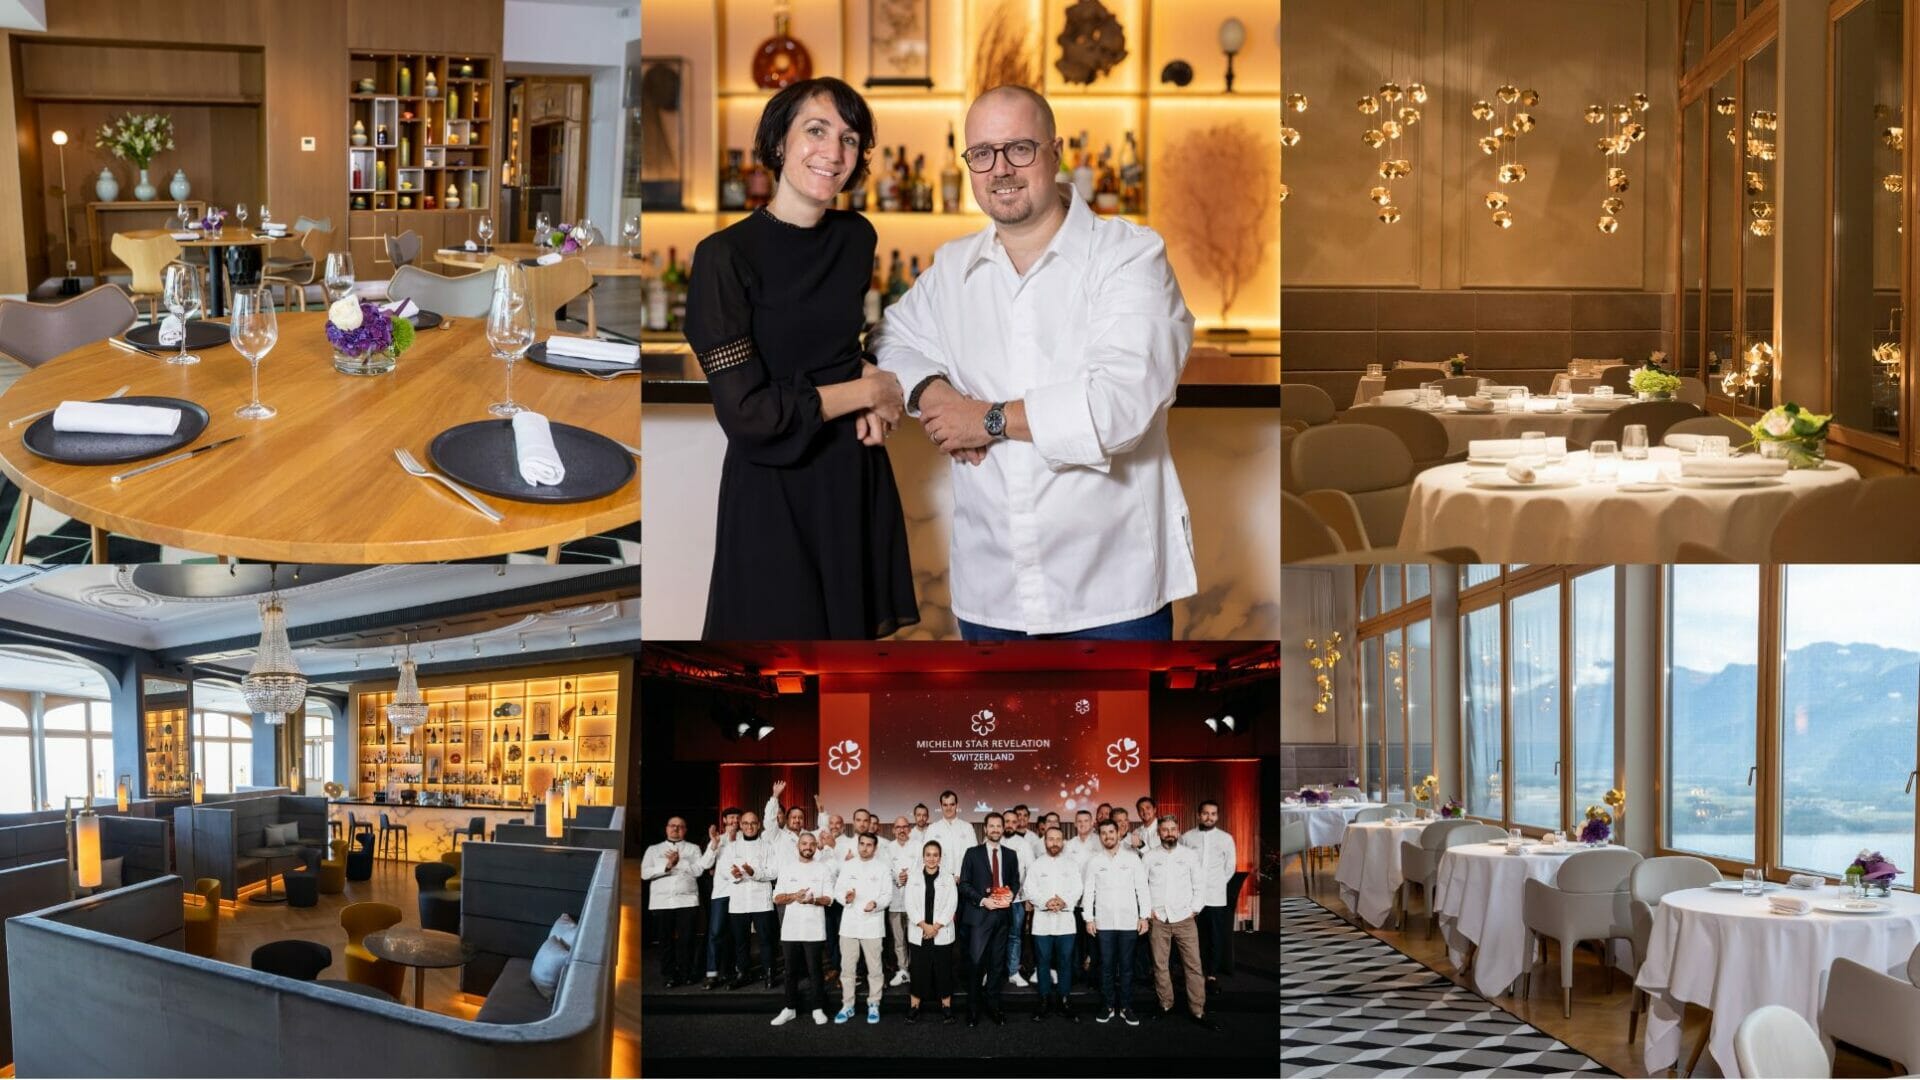 Michelin Guide awards for “Maison Décotterd”, based at Glion Institute of Higher Education